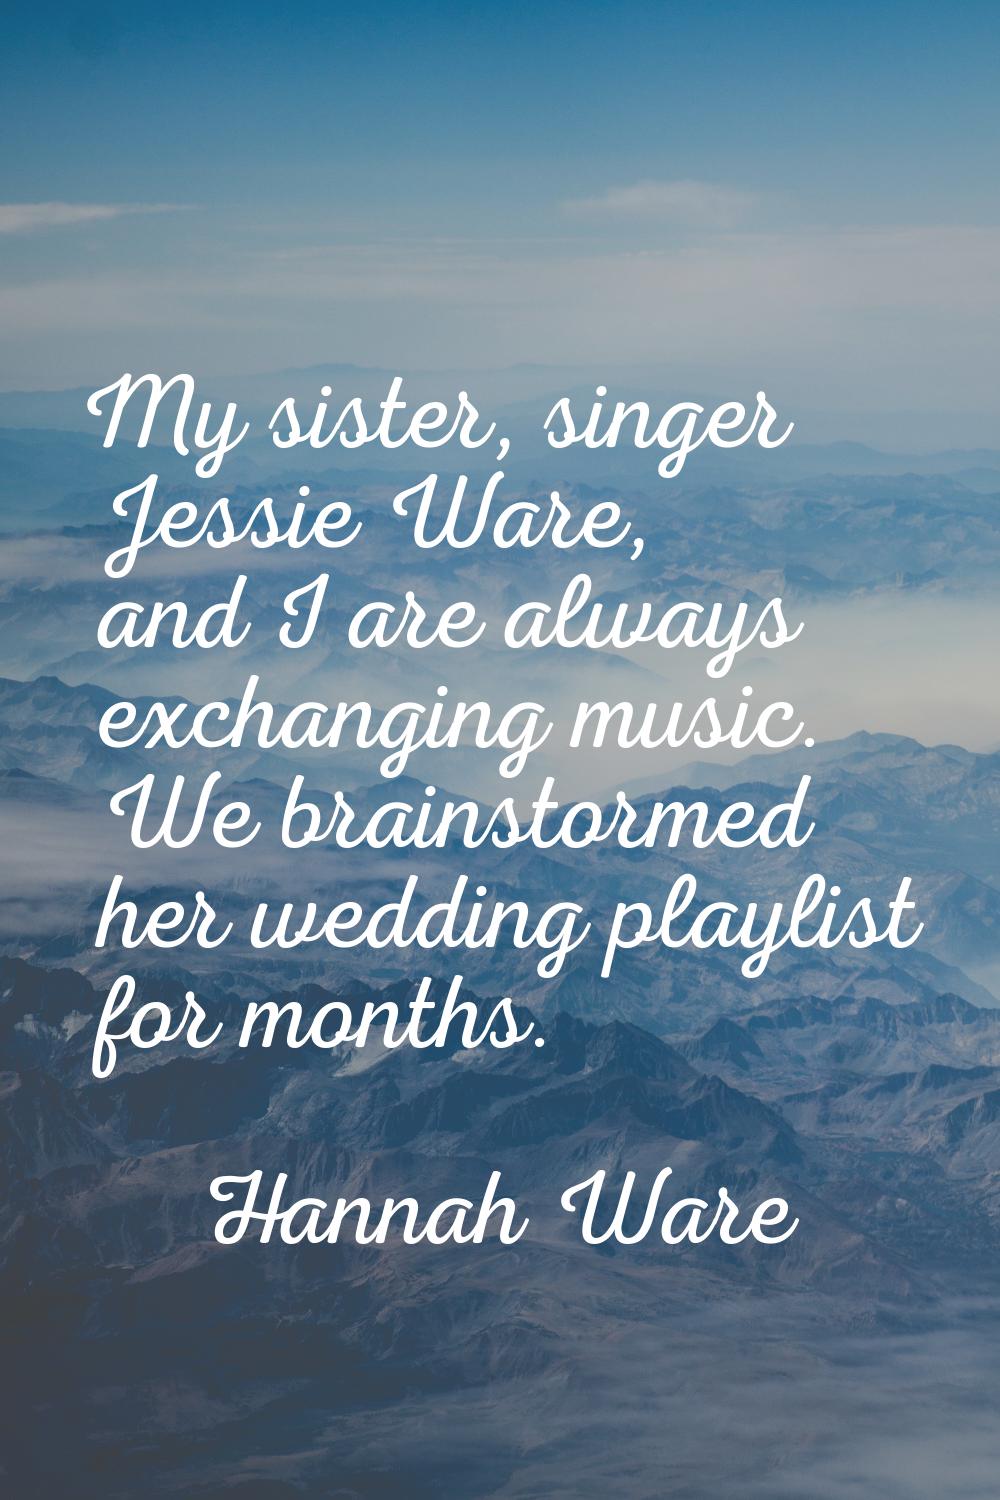 My sister, singer Jessie Ware, and I are always exchanging music. We brainstormed her wedding playl